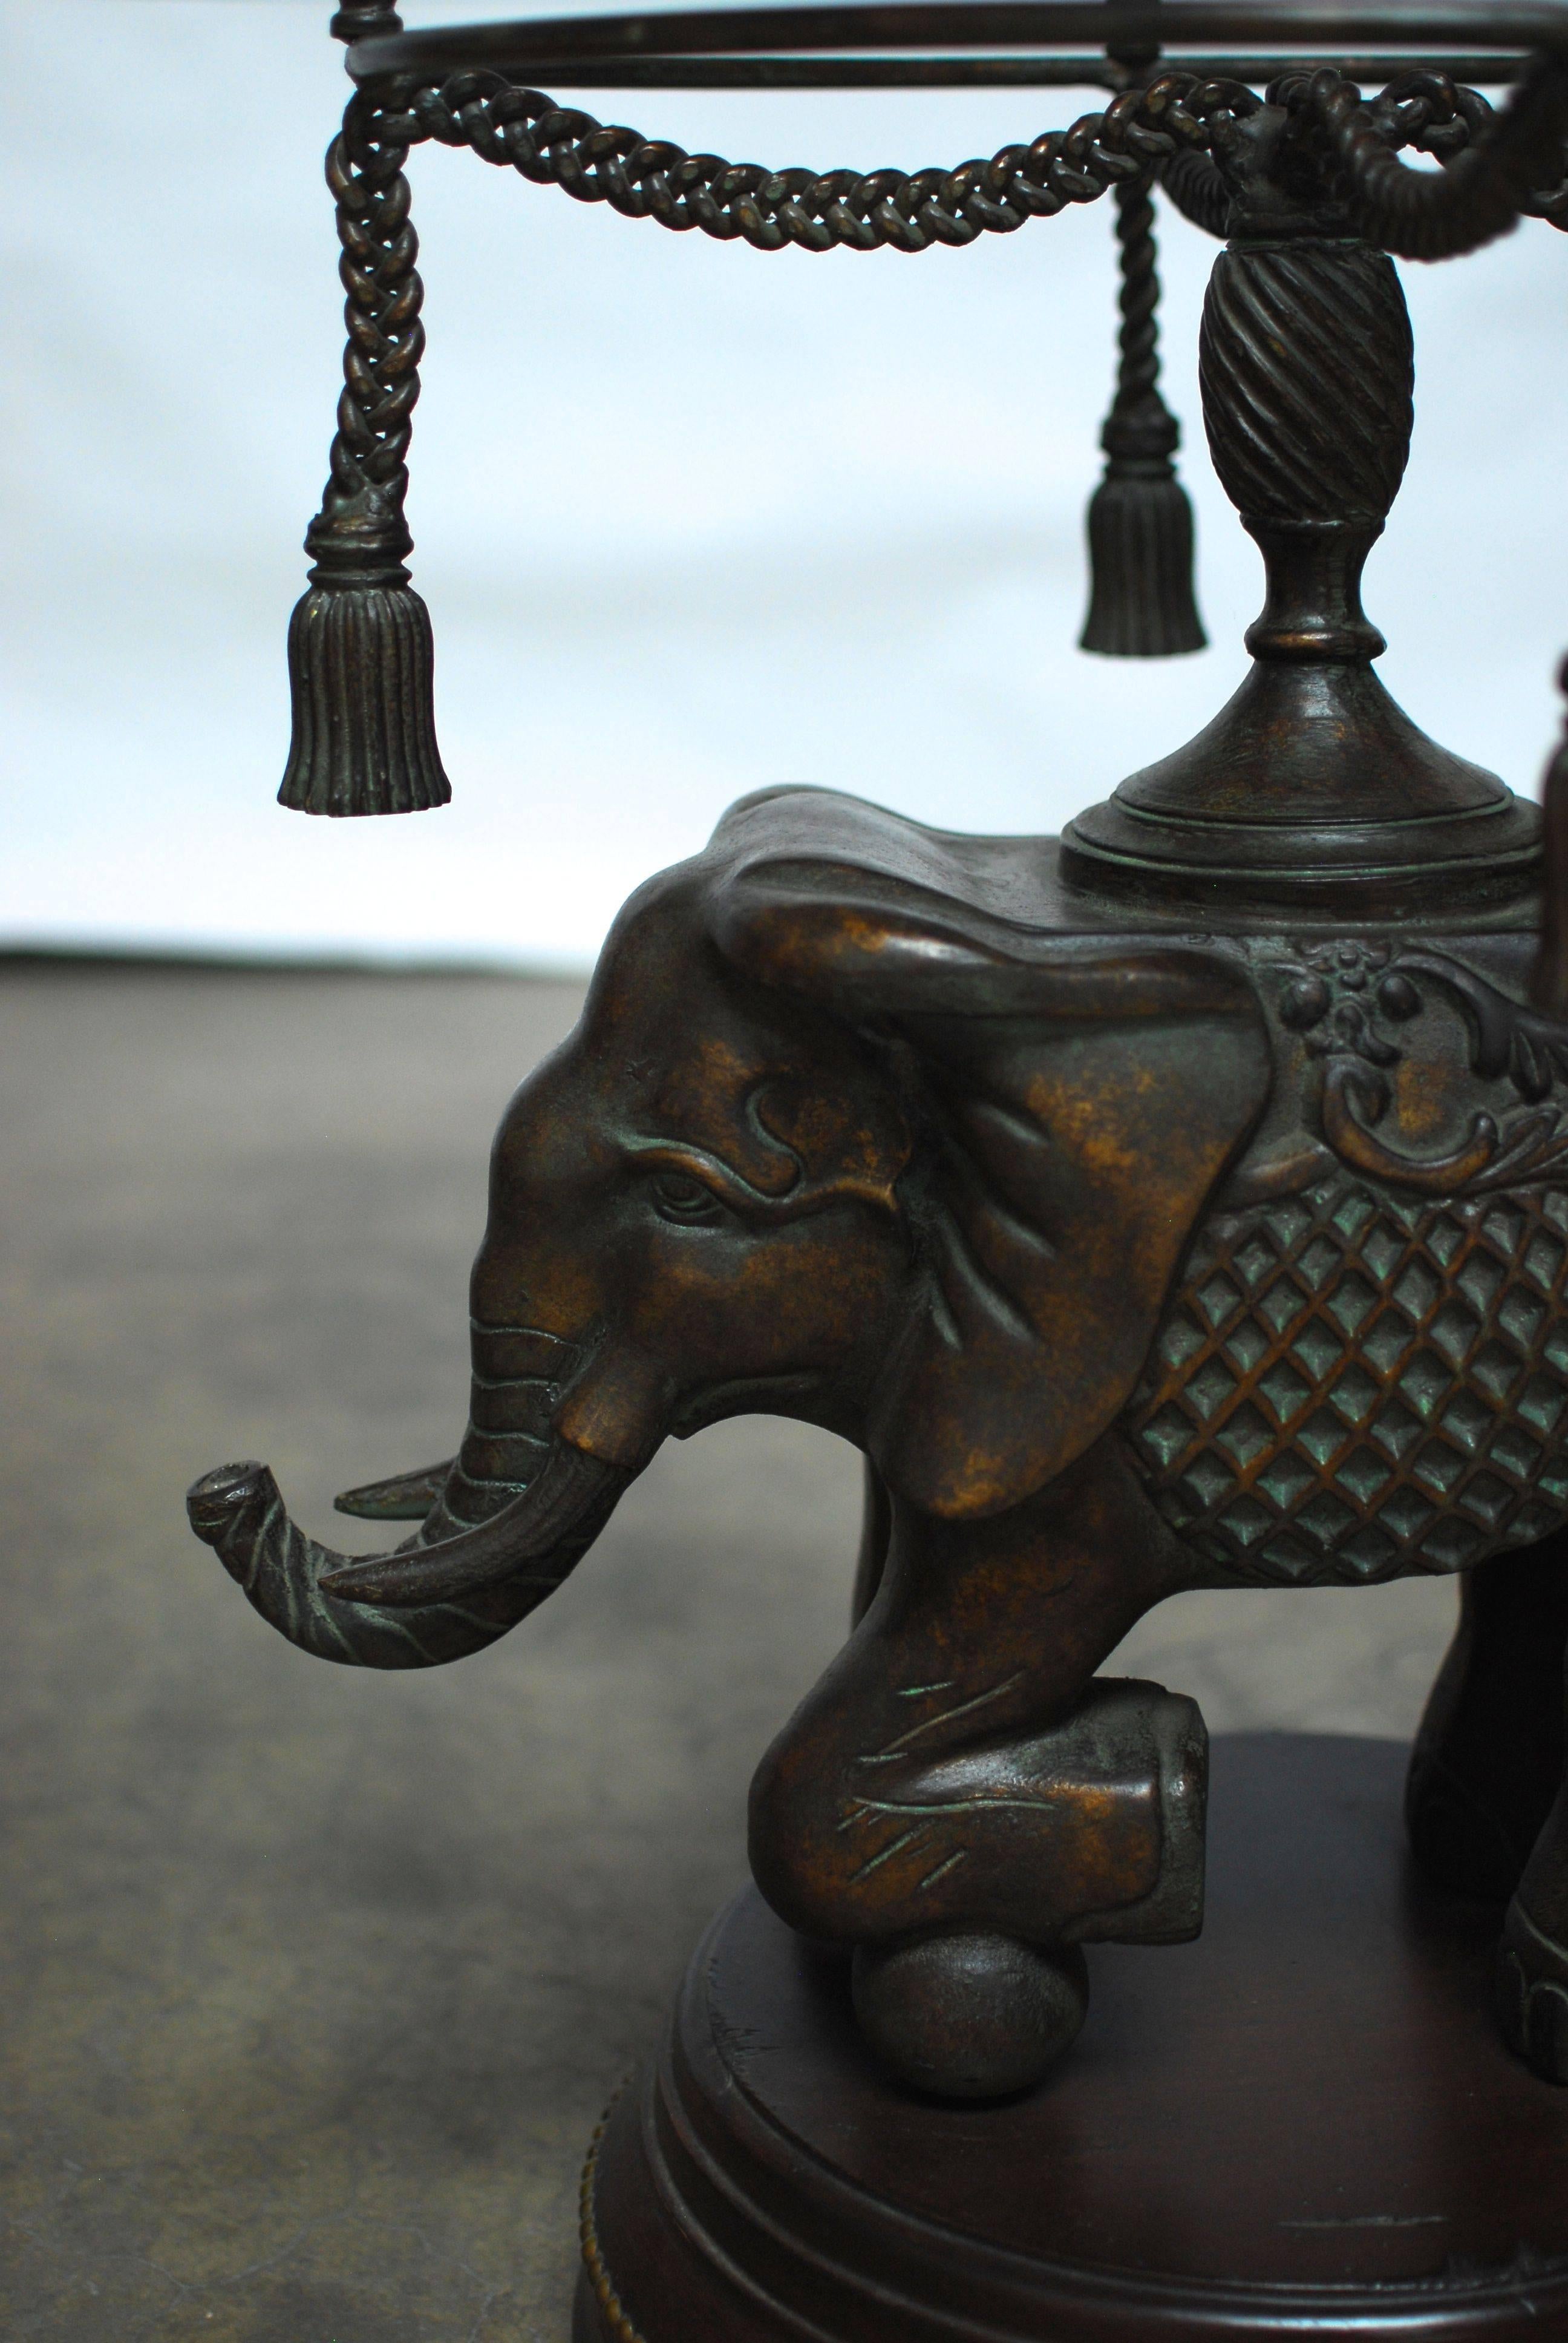 Bronze elephant standing on a carved wood plinth with decorative brass nailheads. Surmounted by a bronze pedestal halo with a swag faux rope terminating in four tassels. The trunk up elephant has tusks and a fretwork costume. This side table has a